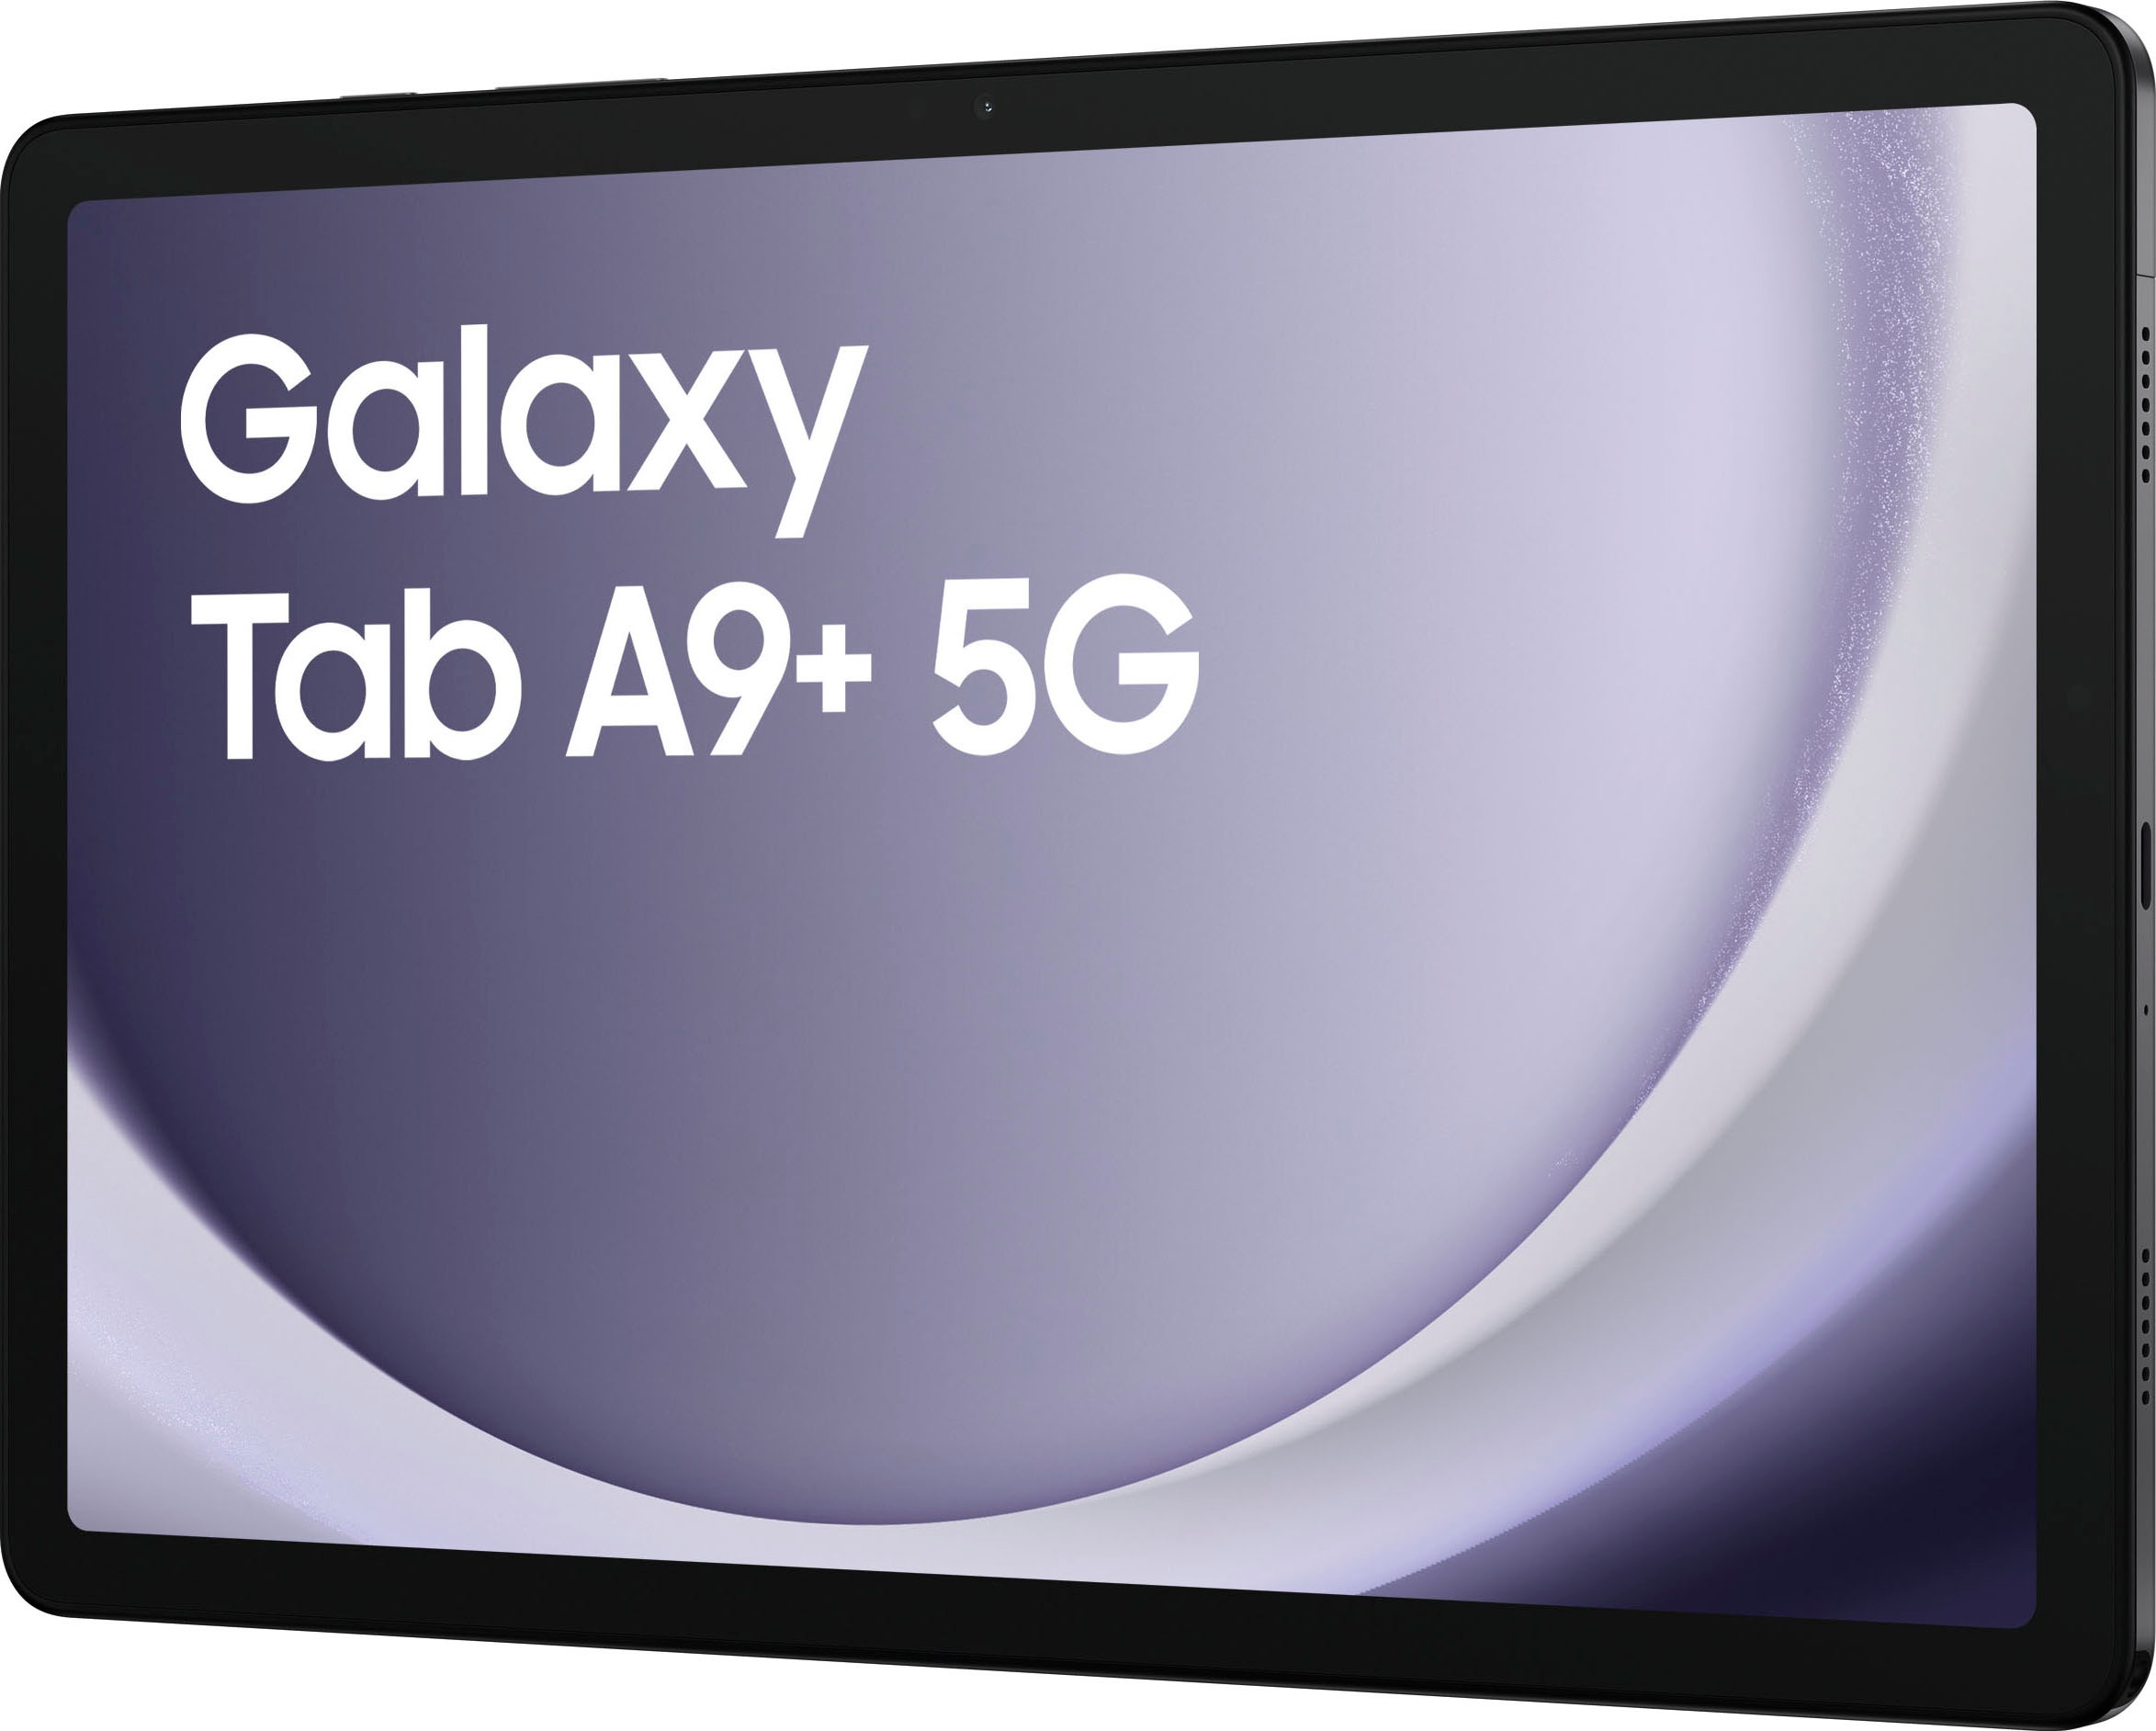 Samsung Tablet »Galaxy Tab A9+ 5G«, (Android,One UI,Knox)